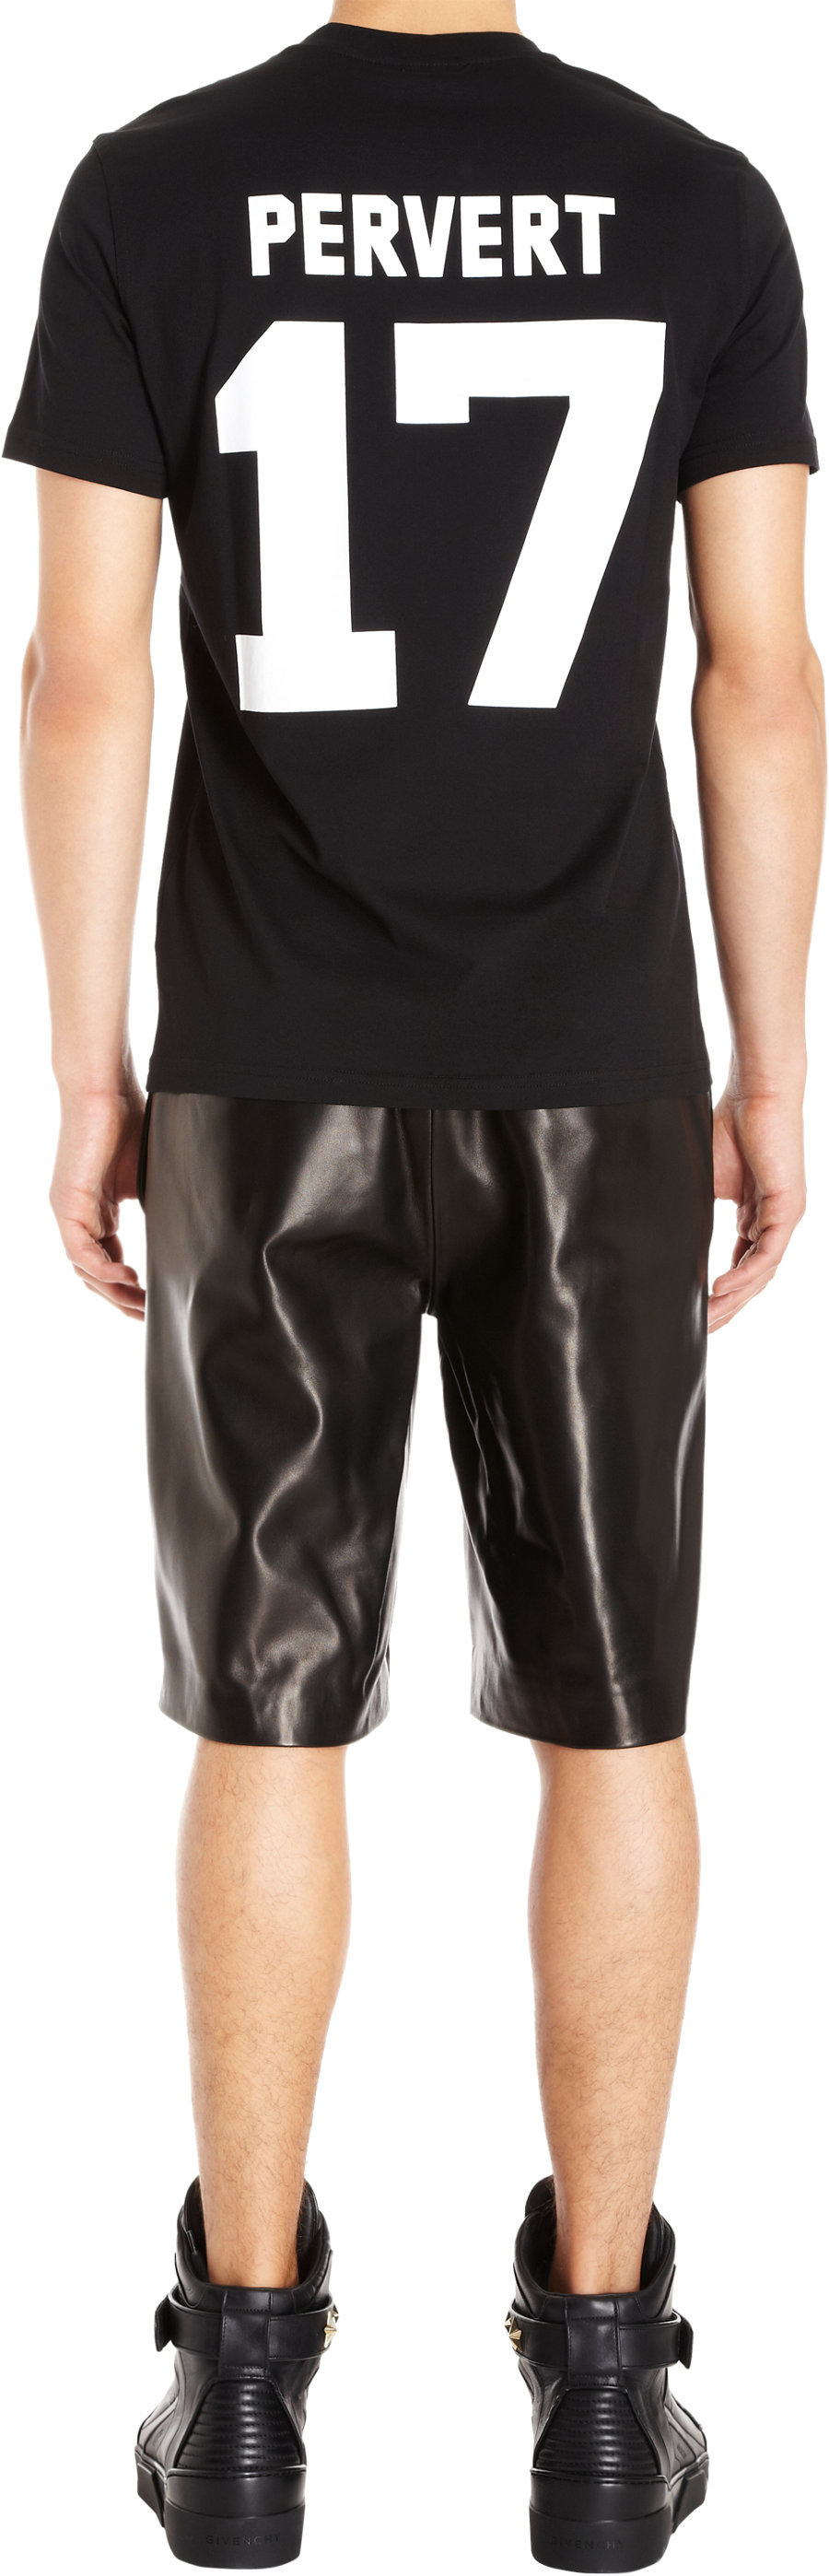 Lyst - Givenchy Leather Bermuda Shorts in Black for Men